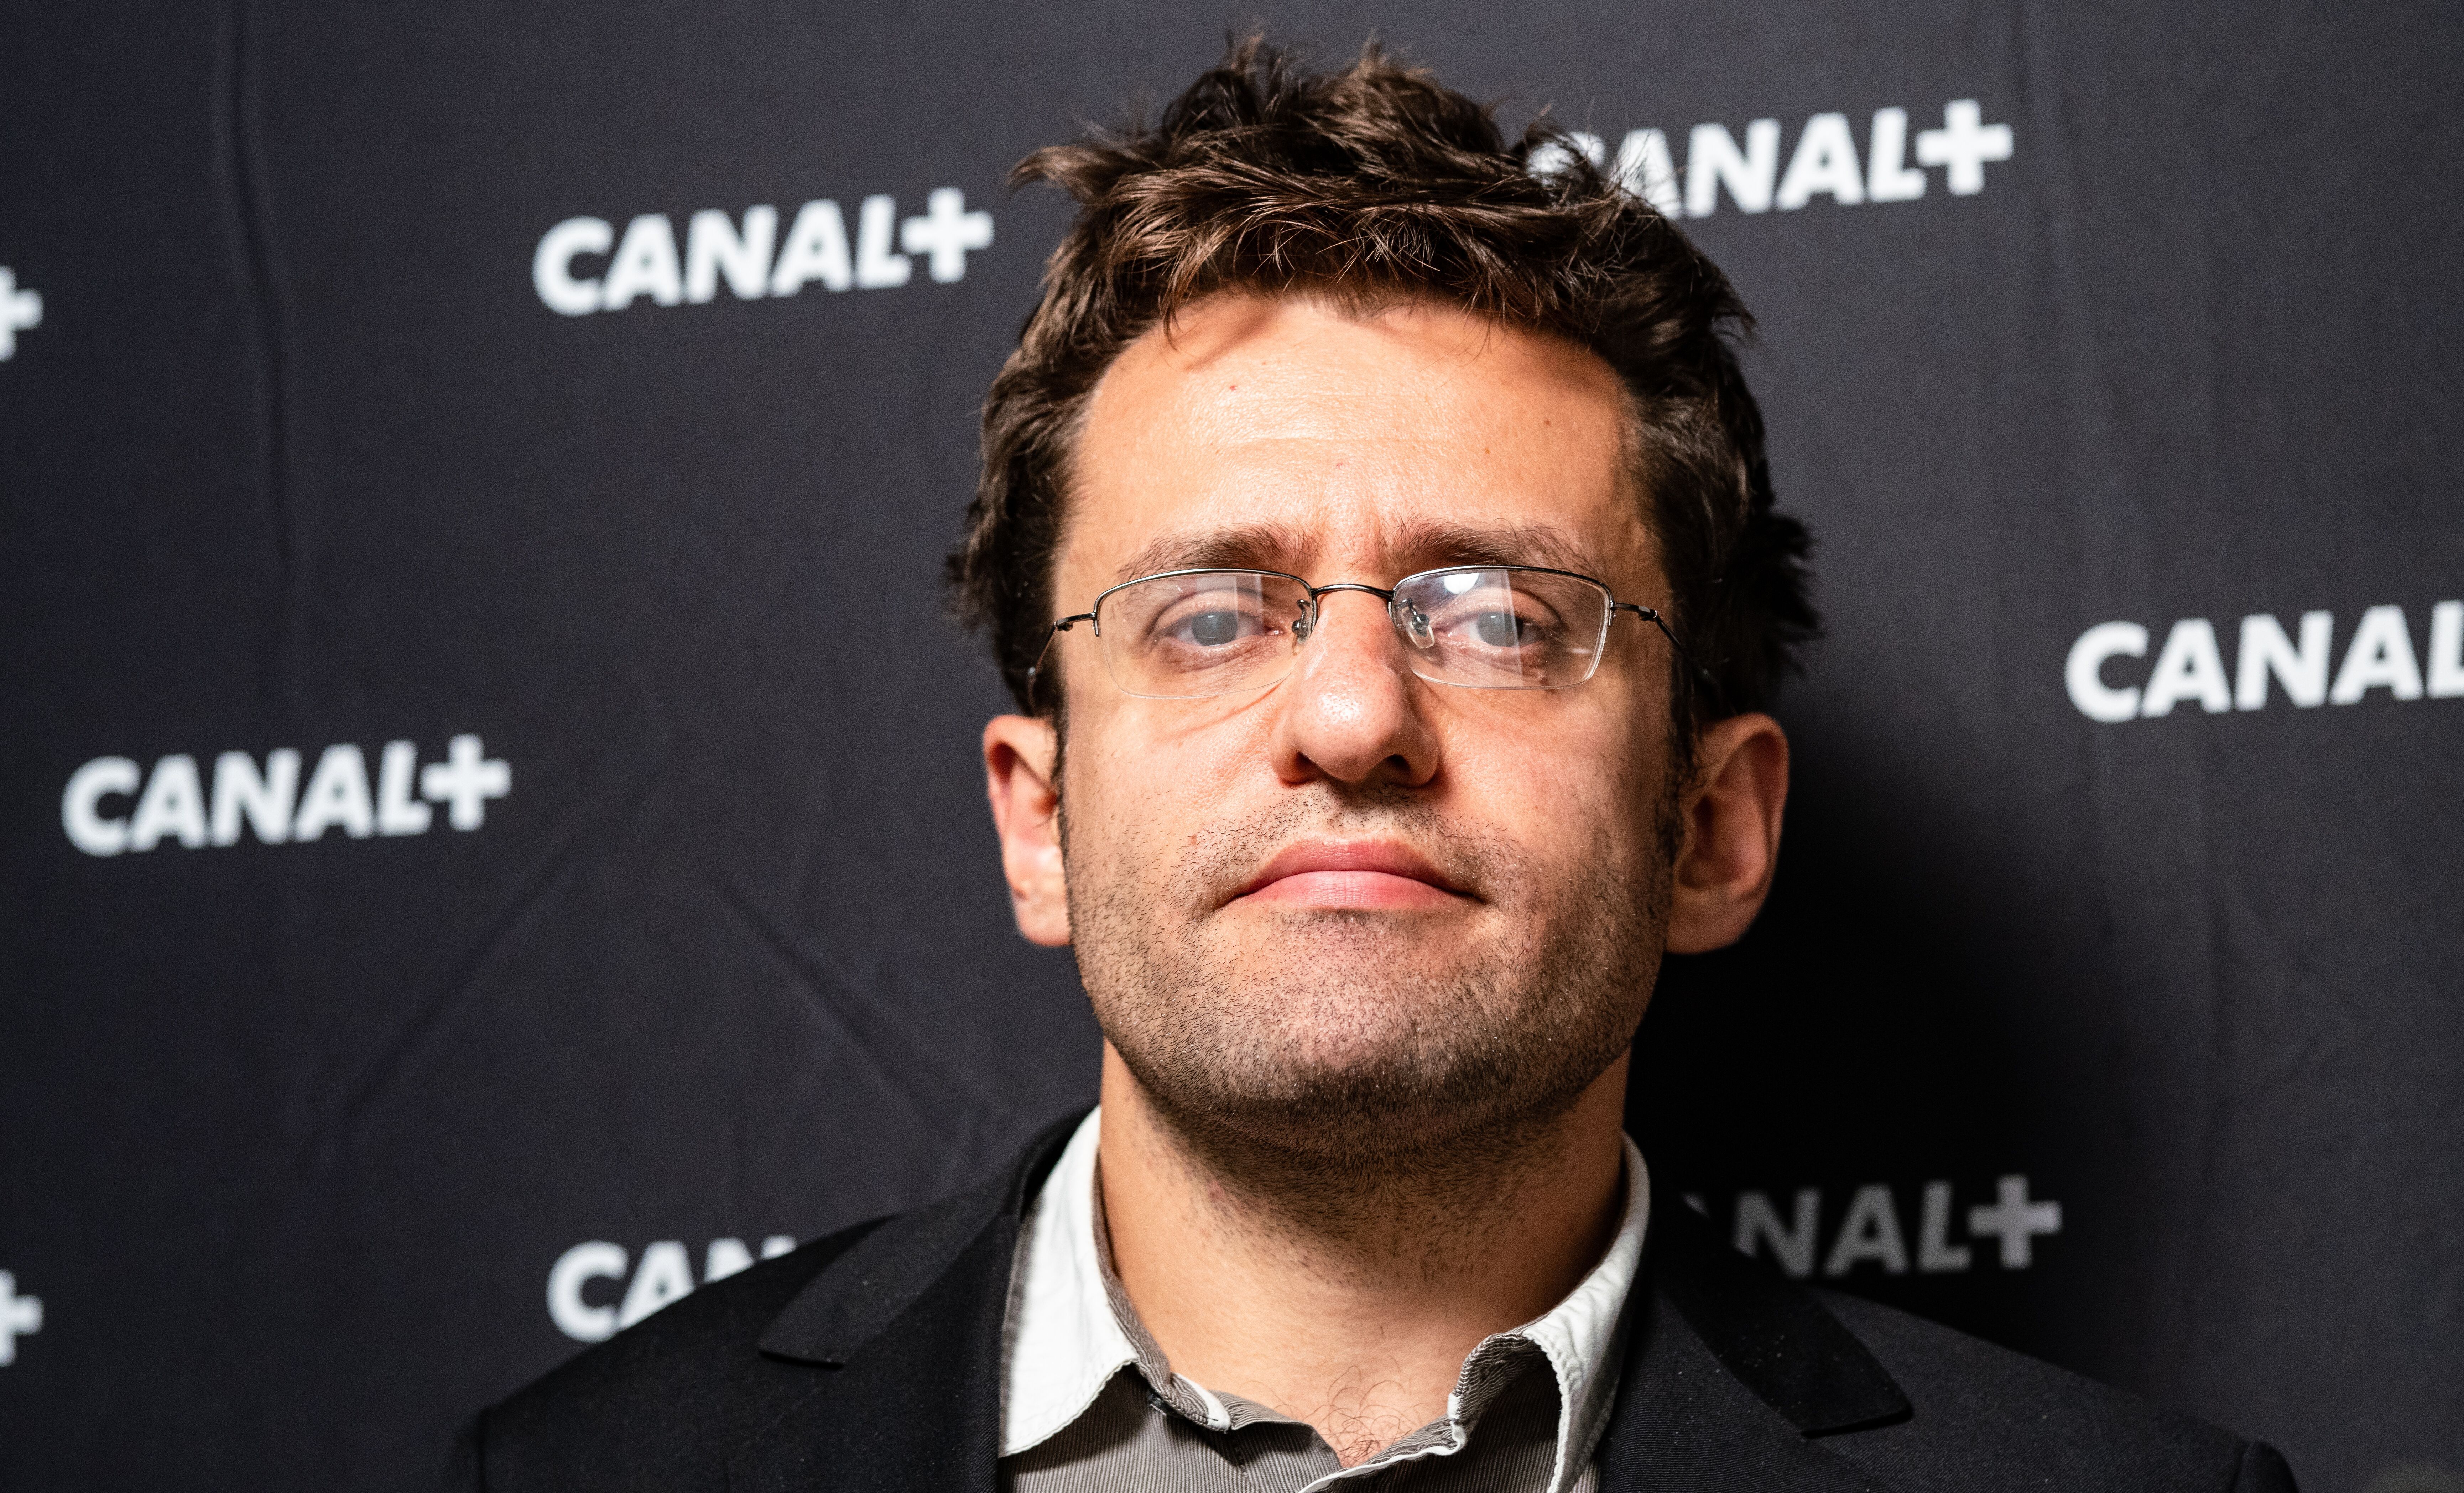 Levon Aronian named highest ranked chess player in US